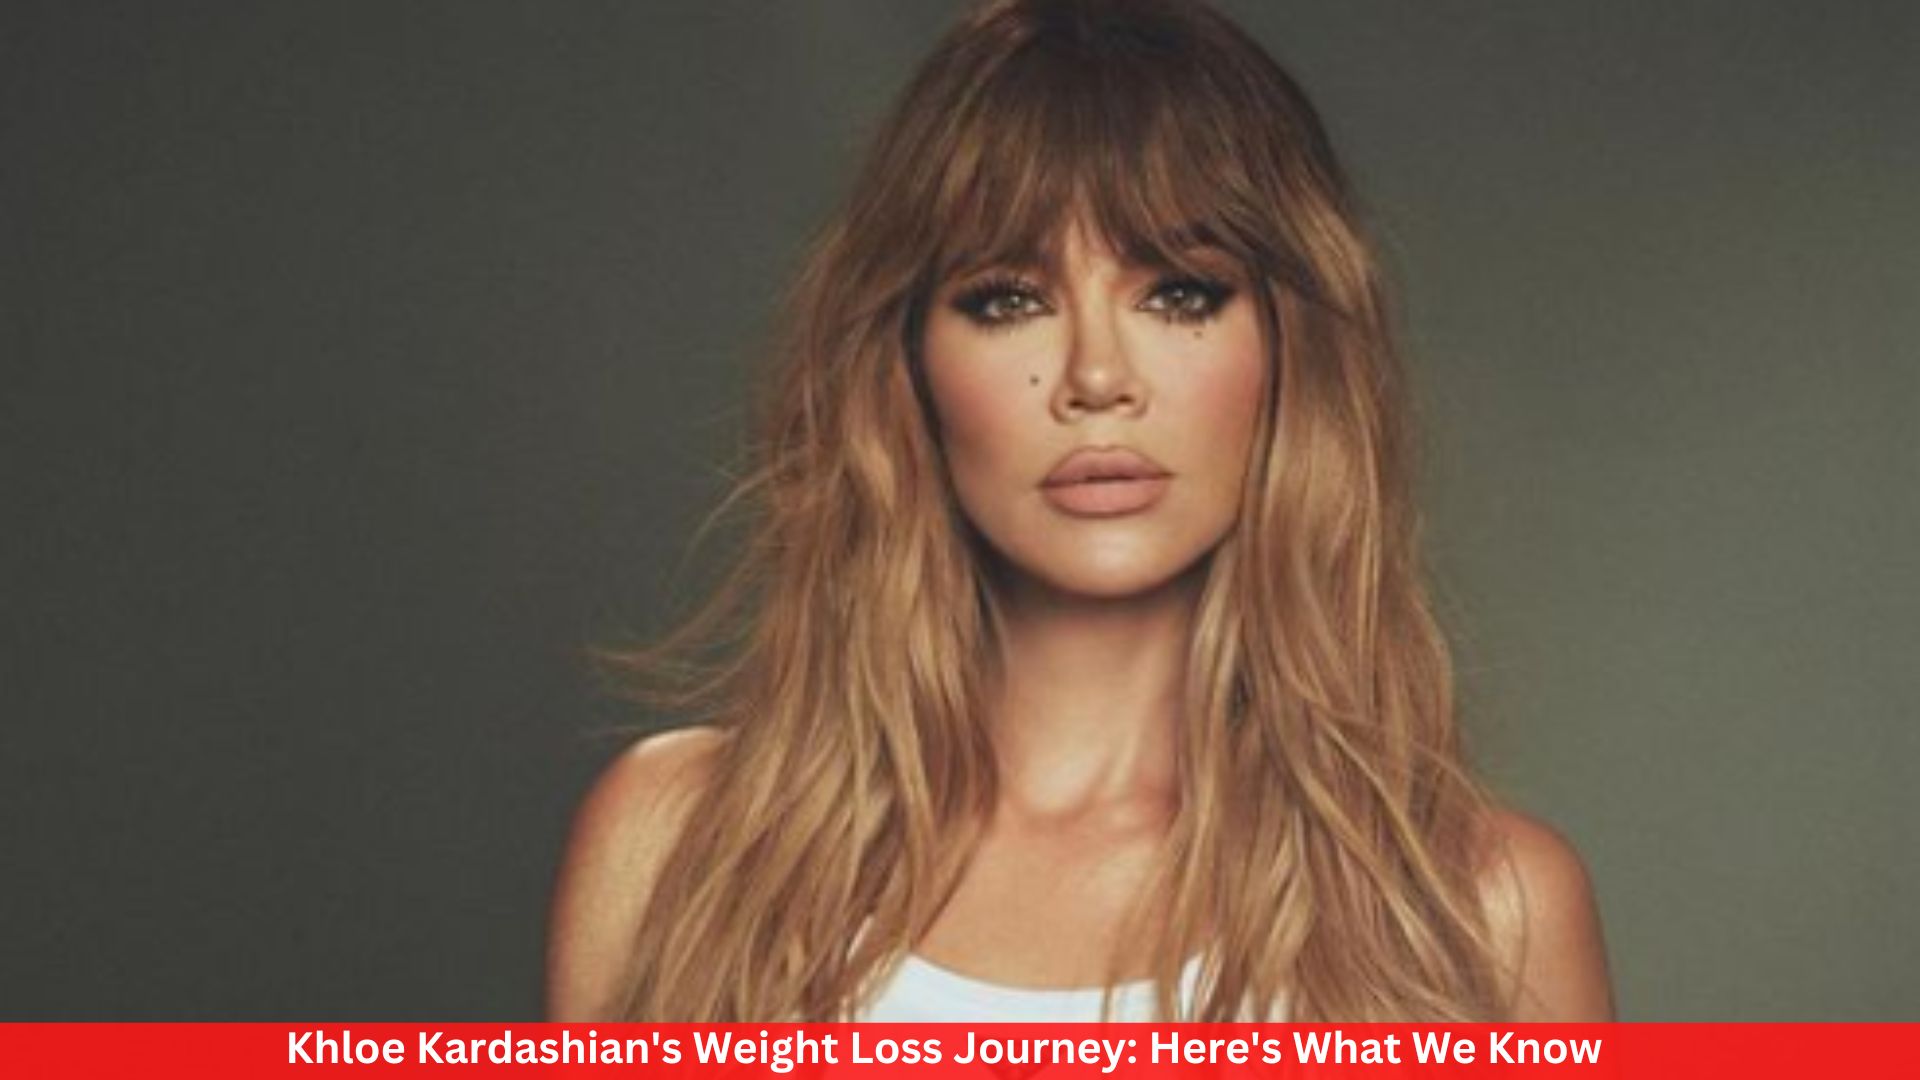 Khloe Kardashian's Weight Loss Journey: Here's What We Know